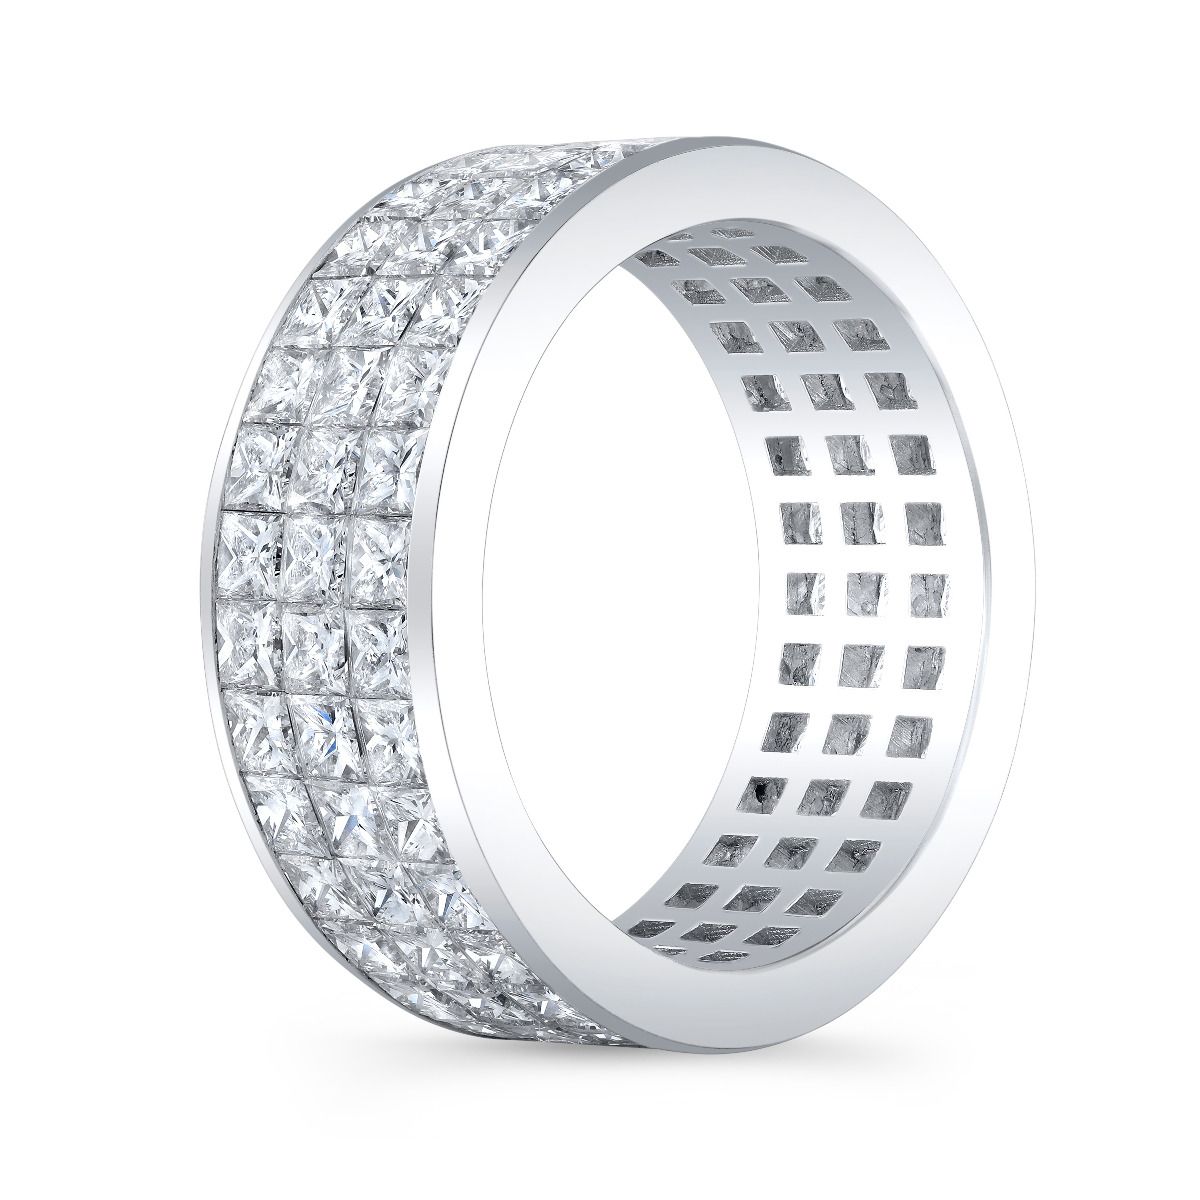 Hand crafted and designed to perfection, this band is made of ethically sourced diamonds and materials. Composed of  3 Rows of Pave Set Of Diamonds on an Invisible-Set.